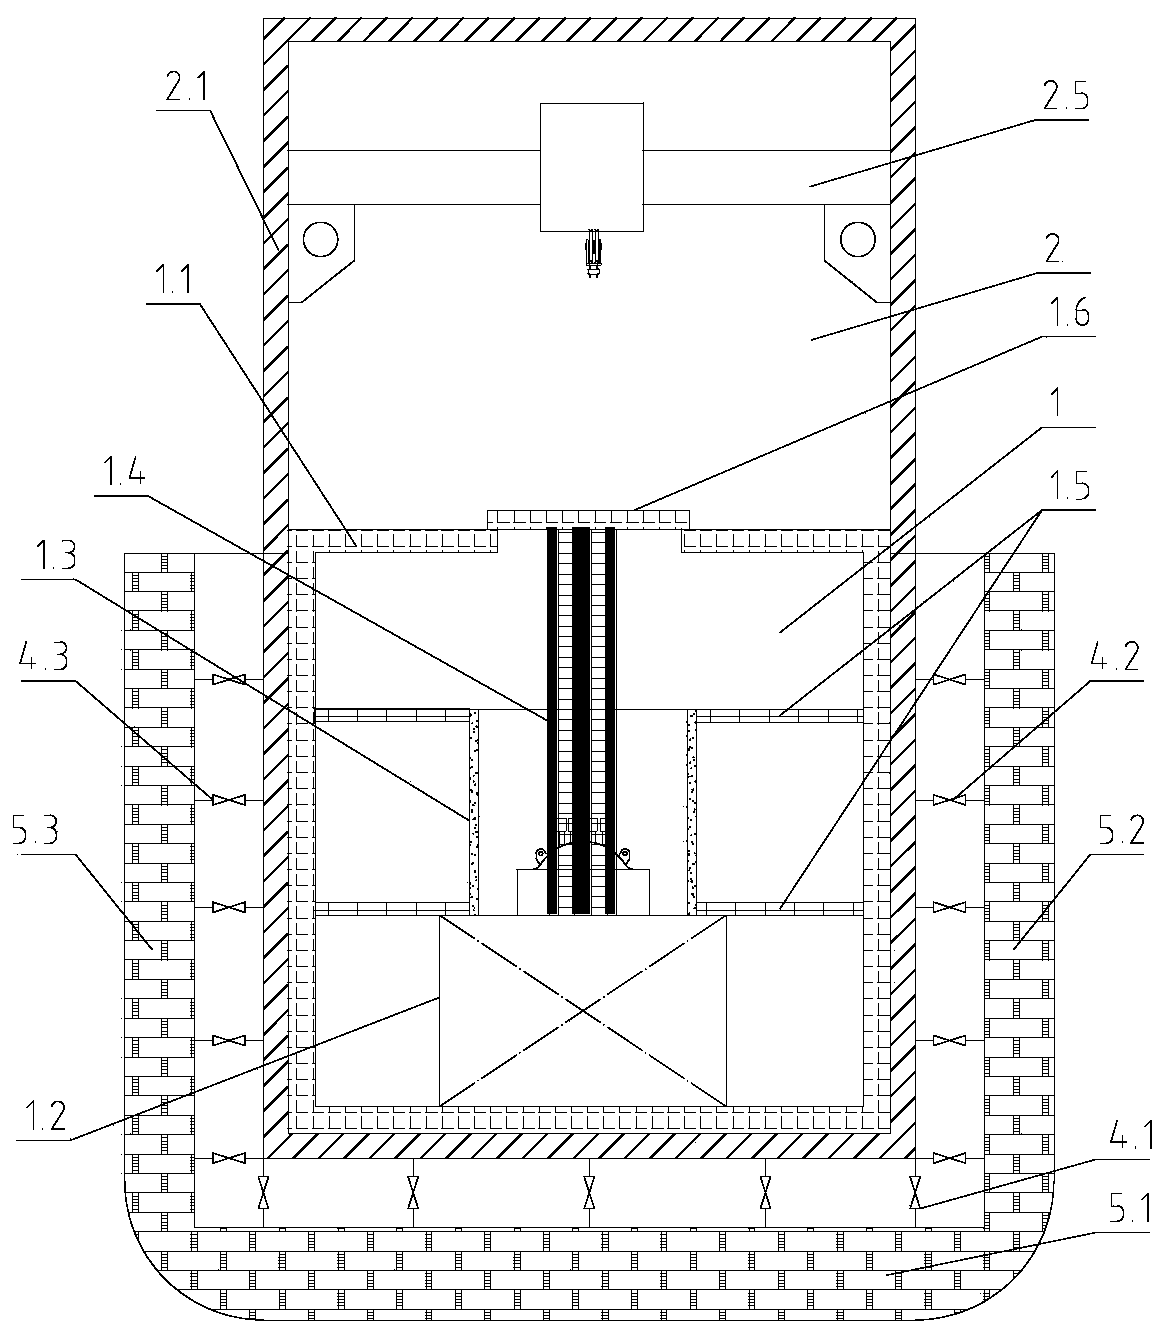 Floating nuclear power station reactor compartment arrangement structure